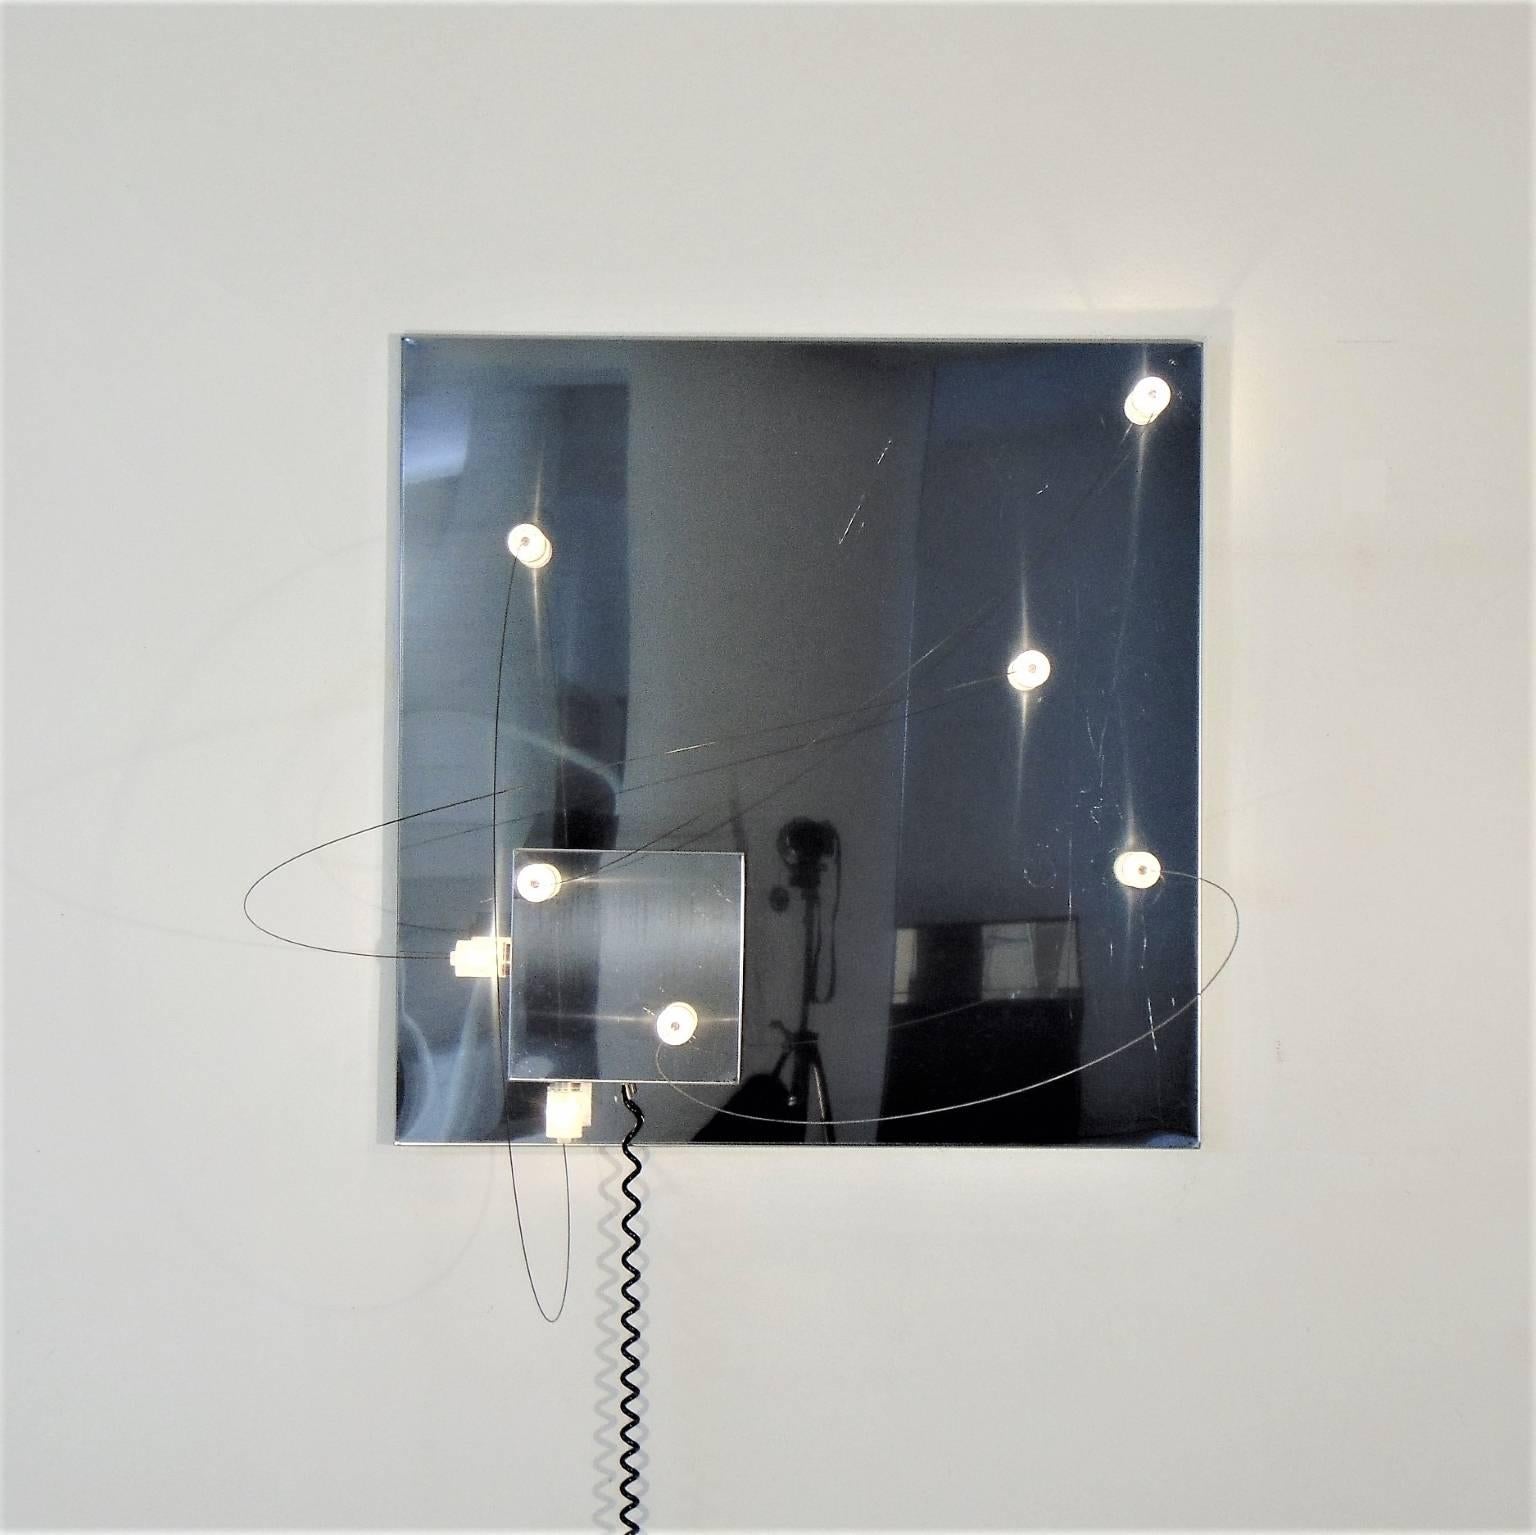 Polished ARDITI 1972 Wall Lamp Chromed Steel with Movable Lucite Lights BT, Sormani Italy For Sale